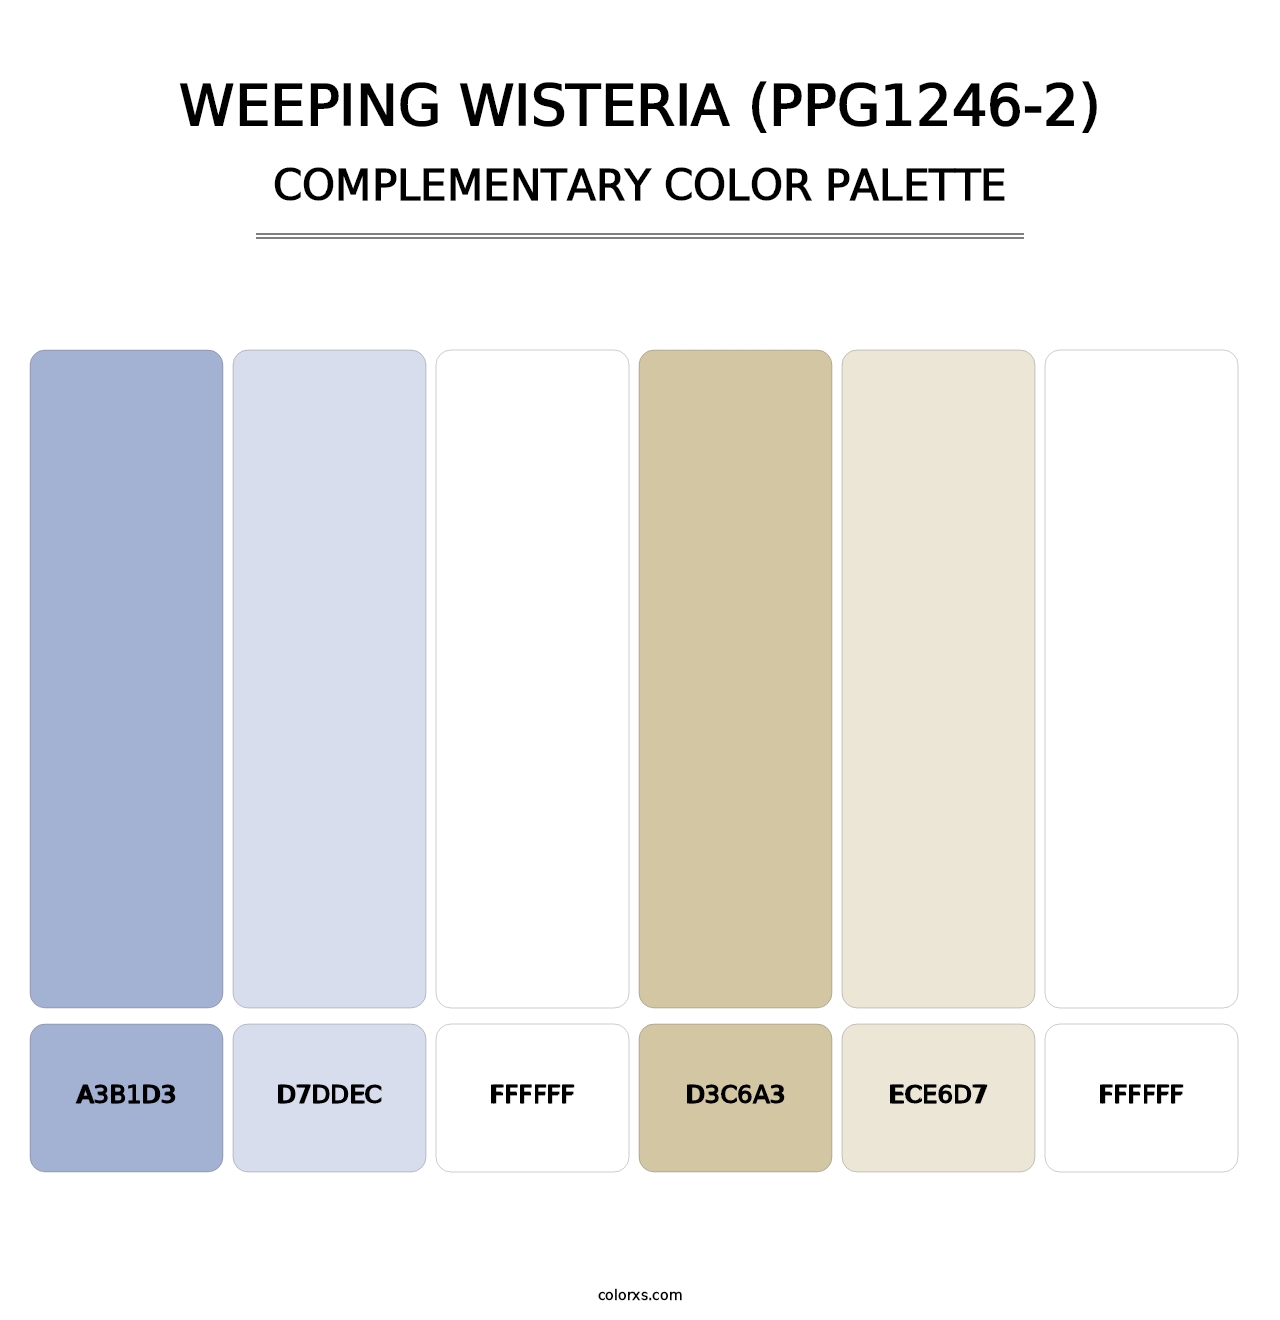 Weeping Wisteria (PPG1246-2) - Complementary Color Palette